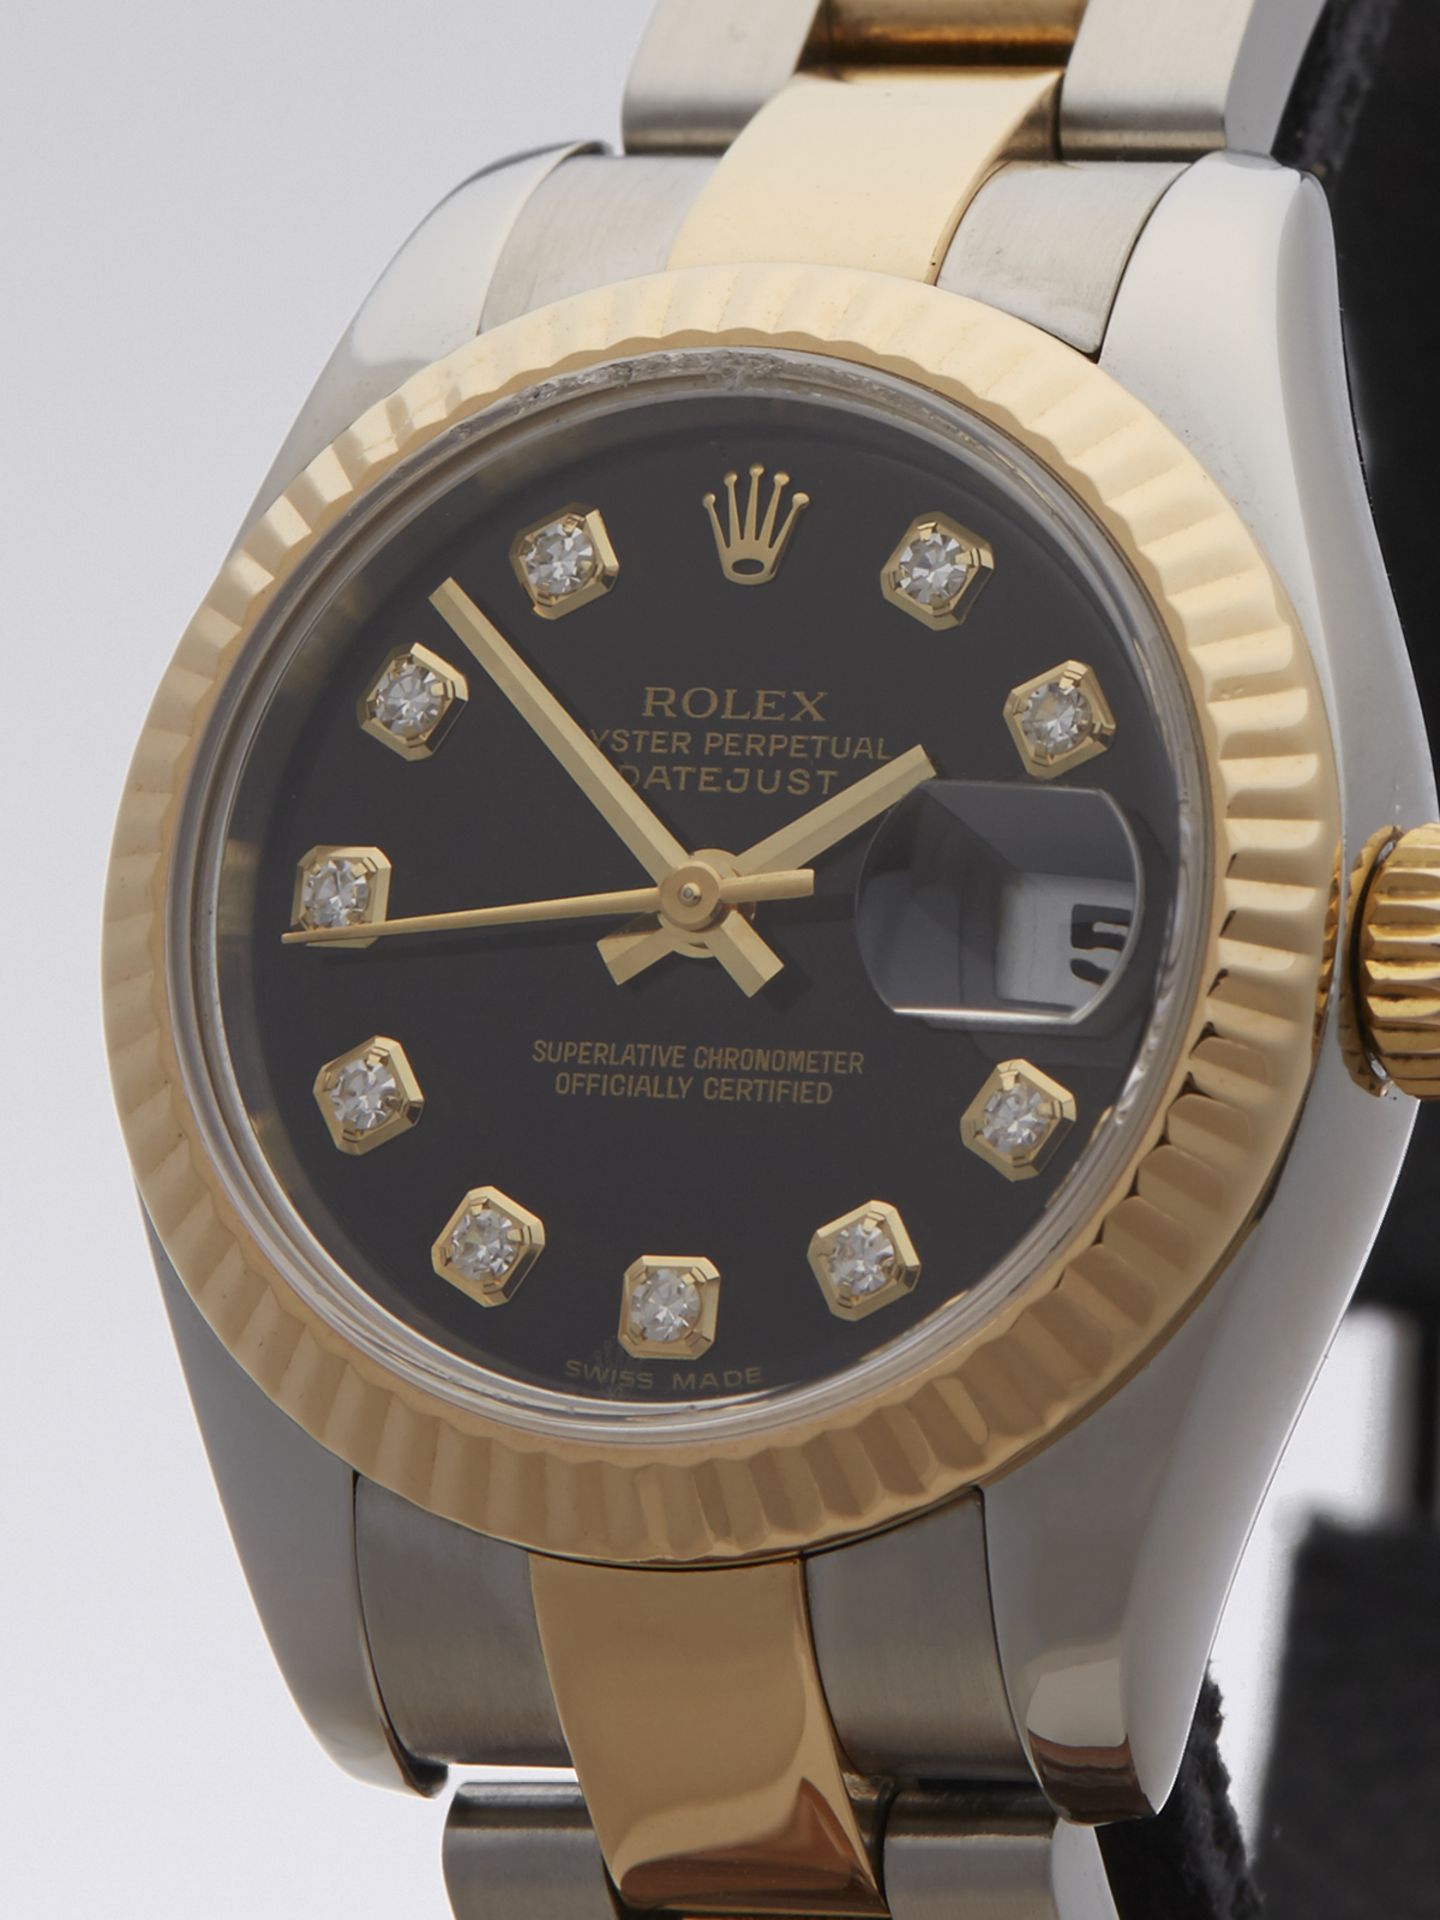 Rolex Datejust 26mm Stainless Steel & 18k Yellow Gold 179173 - Image 3 of 9